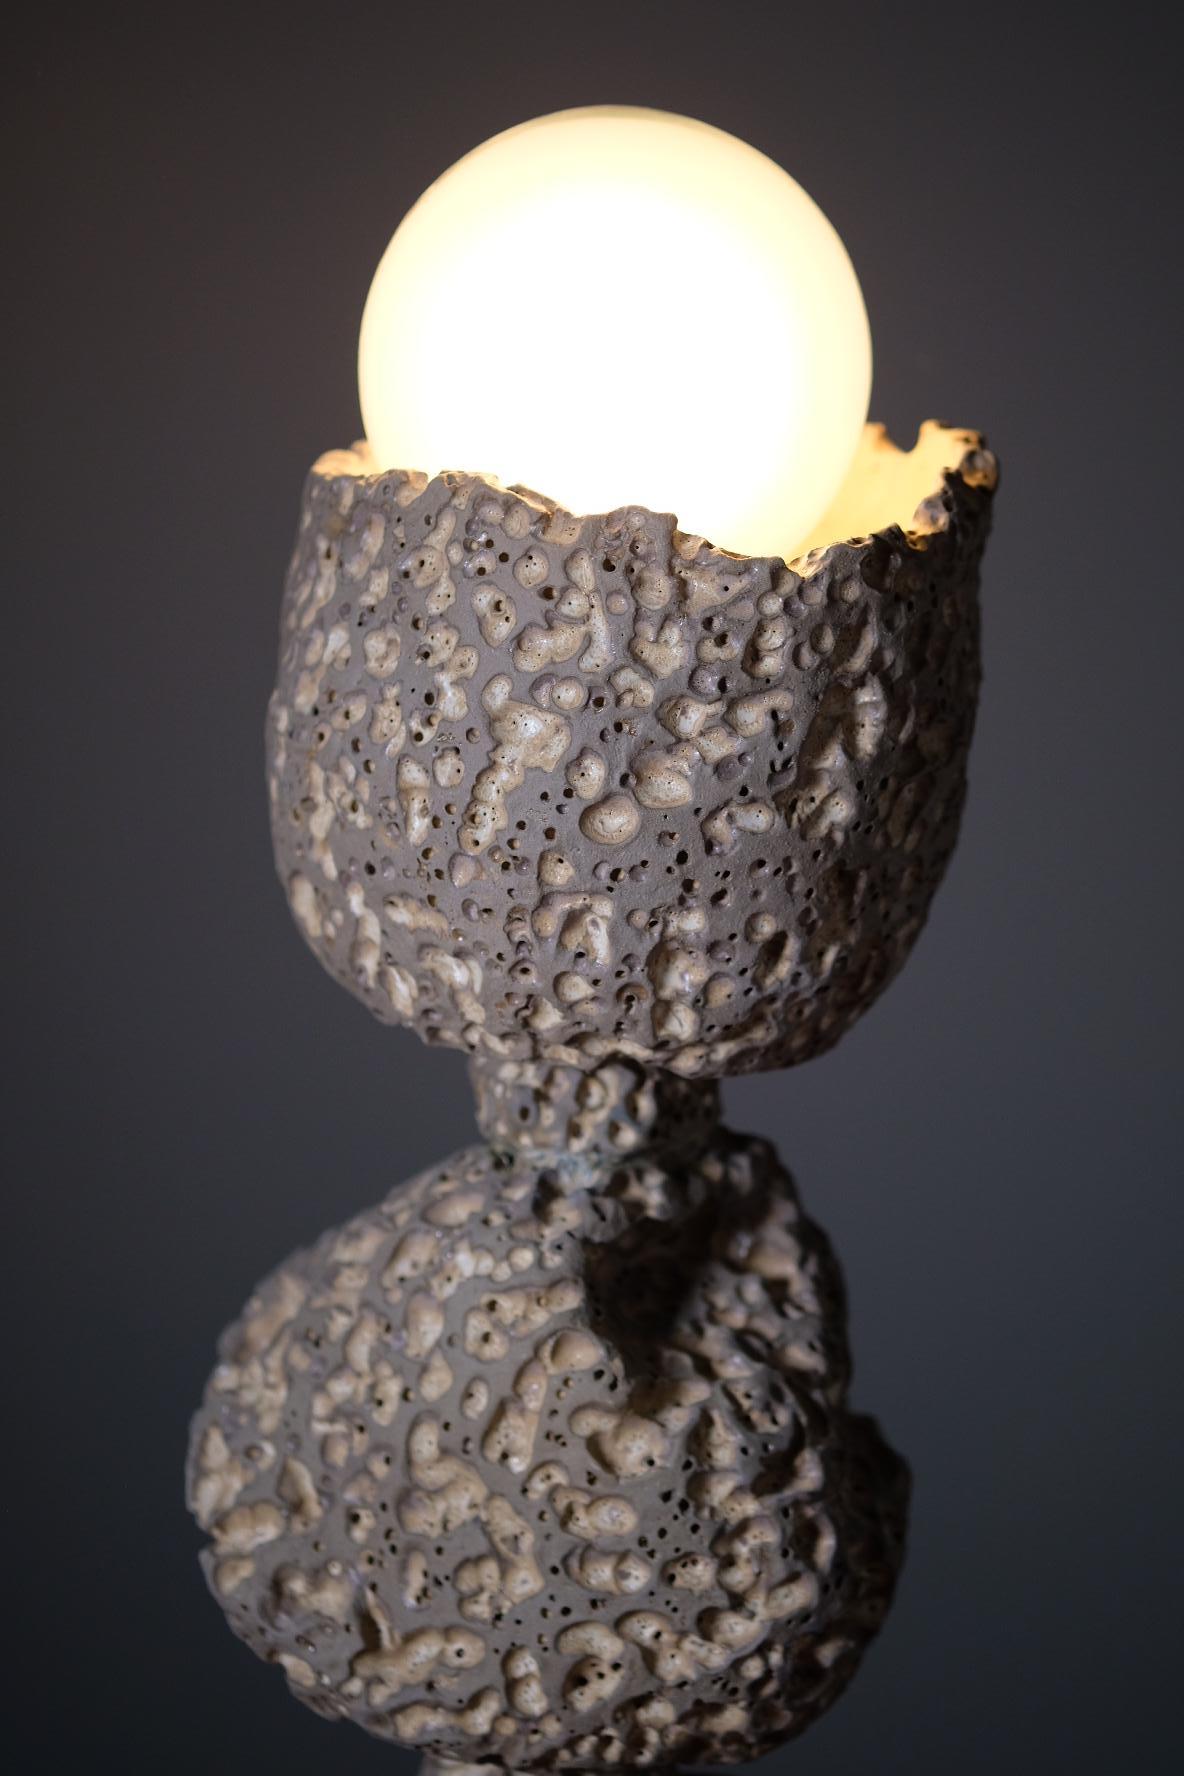 The Lithic Lamp is a monolithic stone sculpture. A part of LGS's 